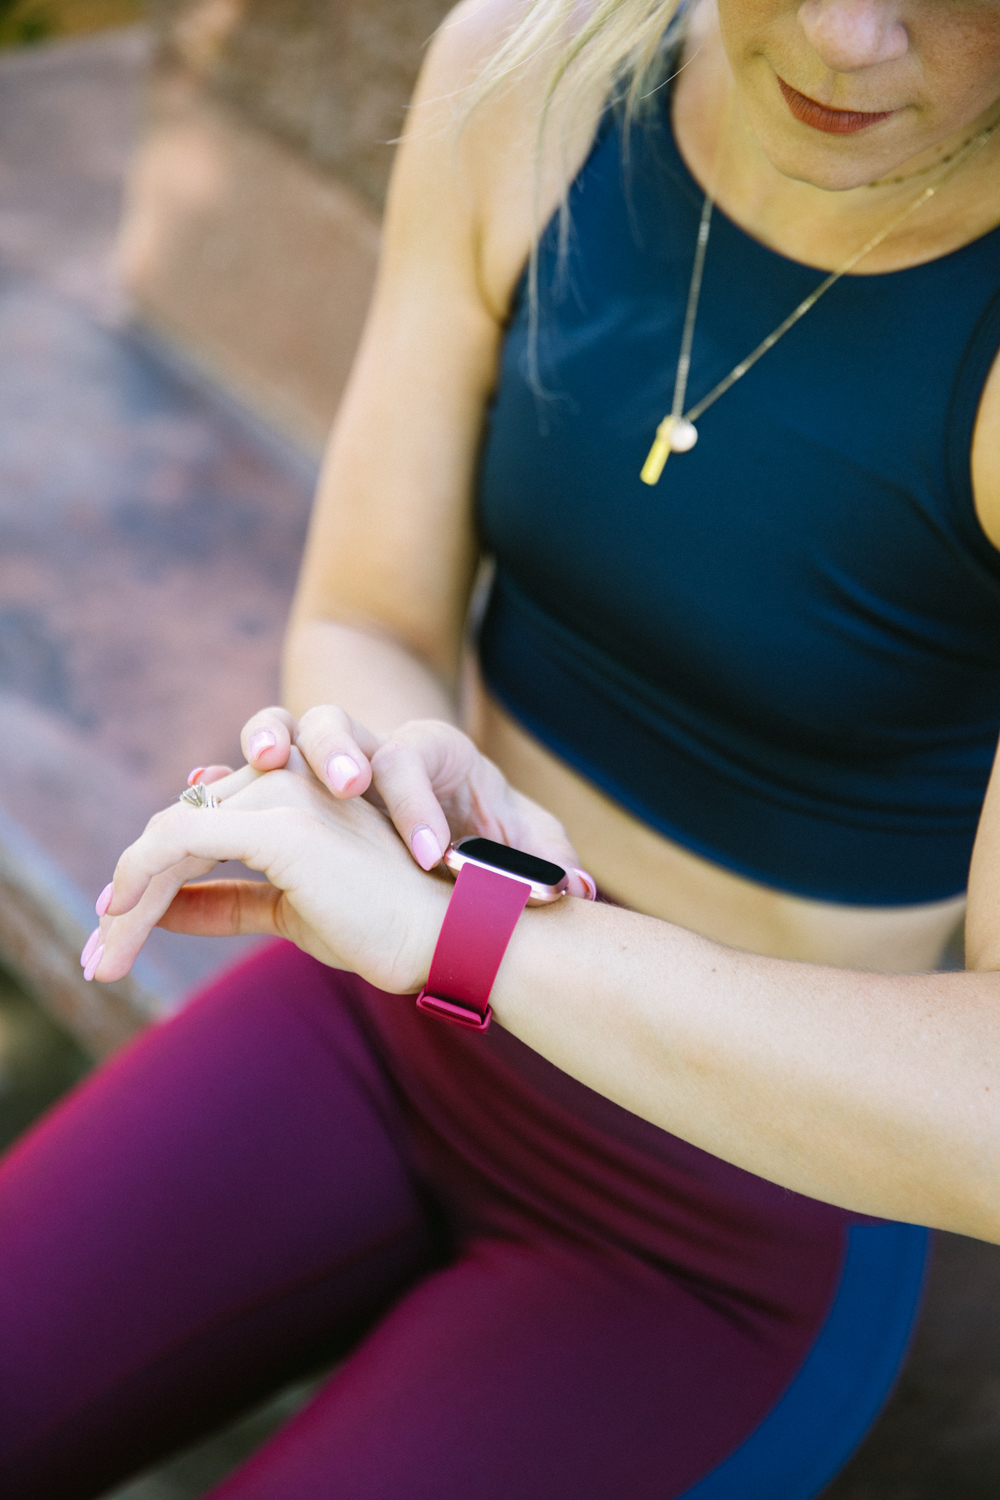 How to stay Fit with FitBit Versa by popular Las Vegas lifestyle blog, Life of a Sister